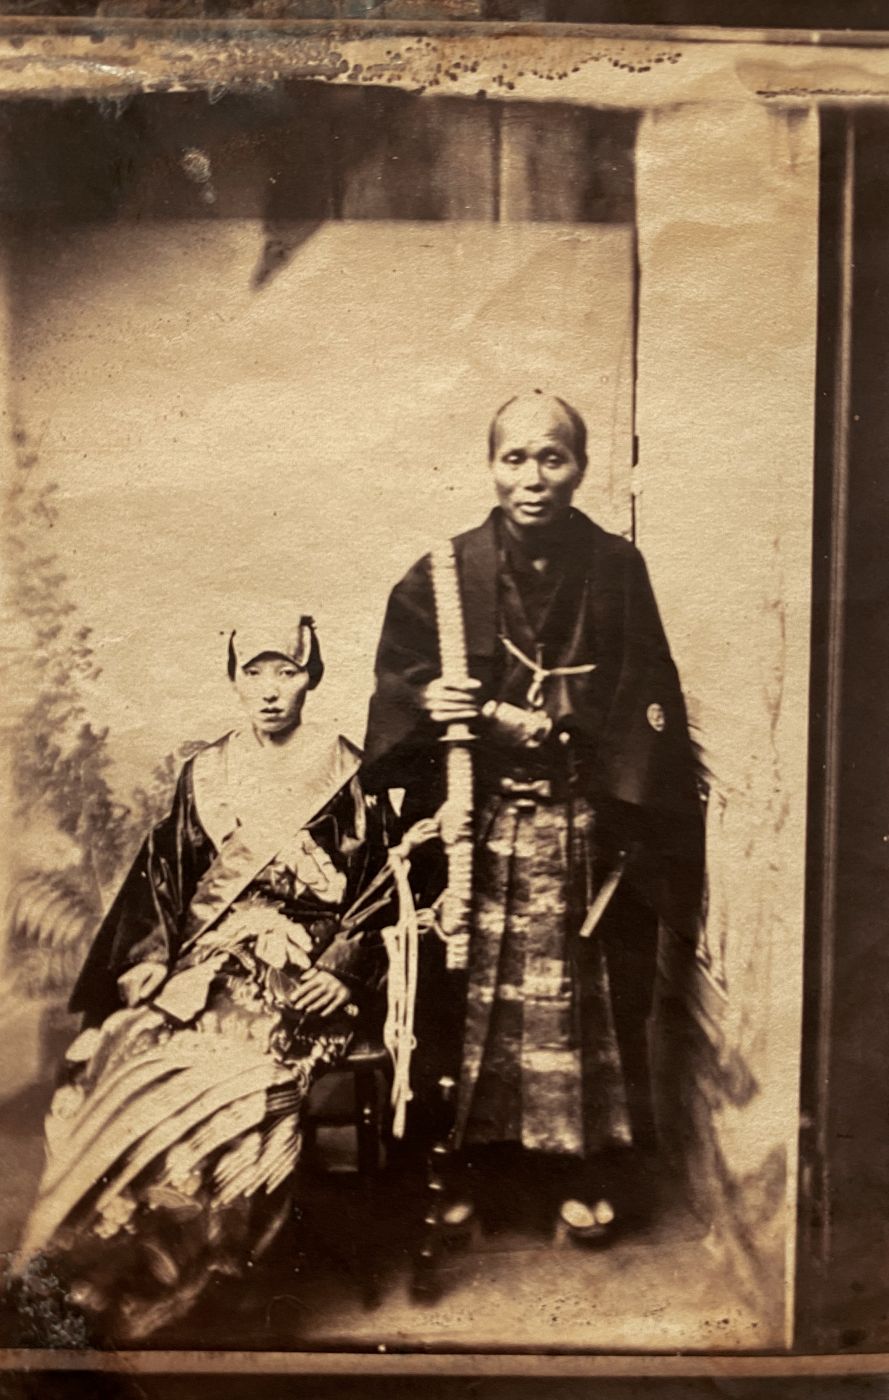 Anonymous, “Samurai with onnagata actor or a Kagema male prostitute”, 1868 ca.